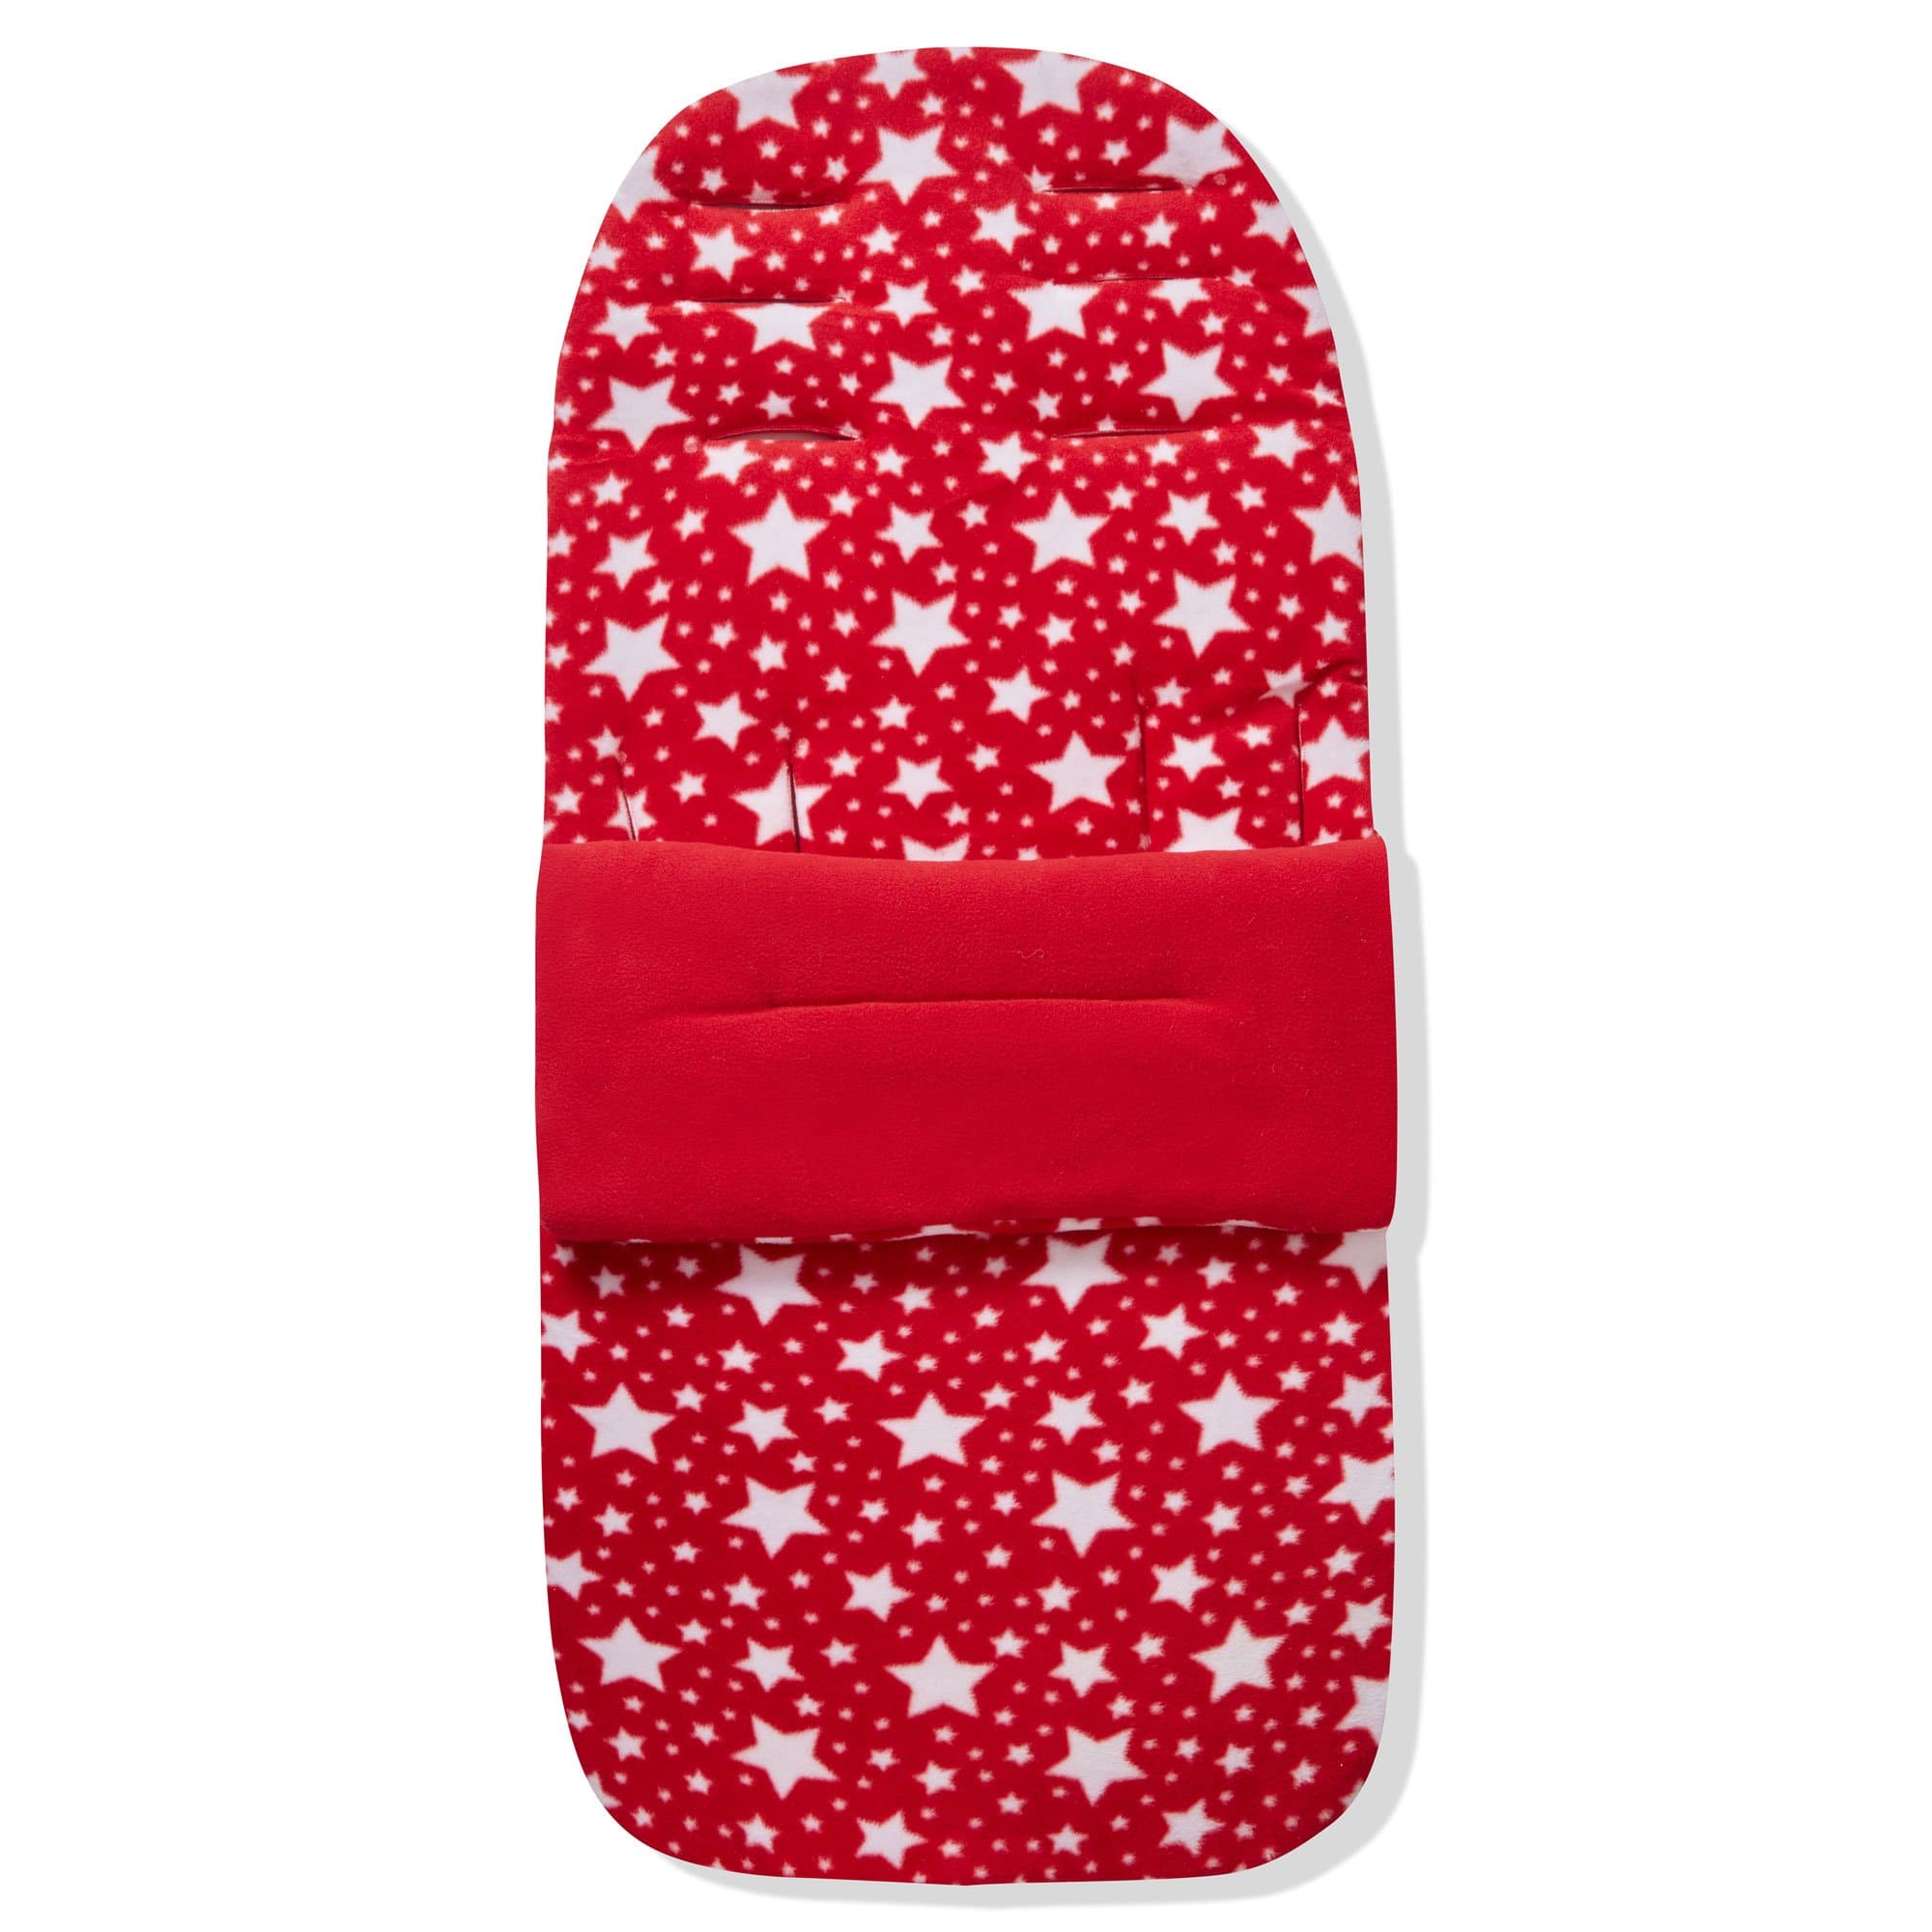 Fleece Footmuff / Cosy Toes Compatible with Kiddy - Red Star / Fits All Models | For Your Little One